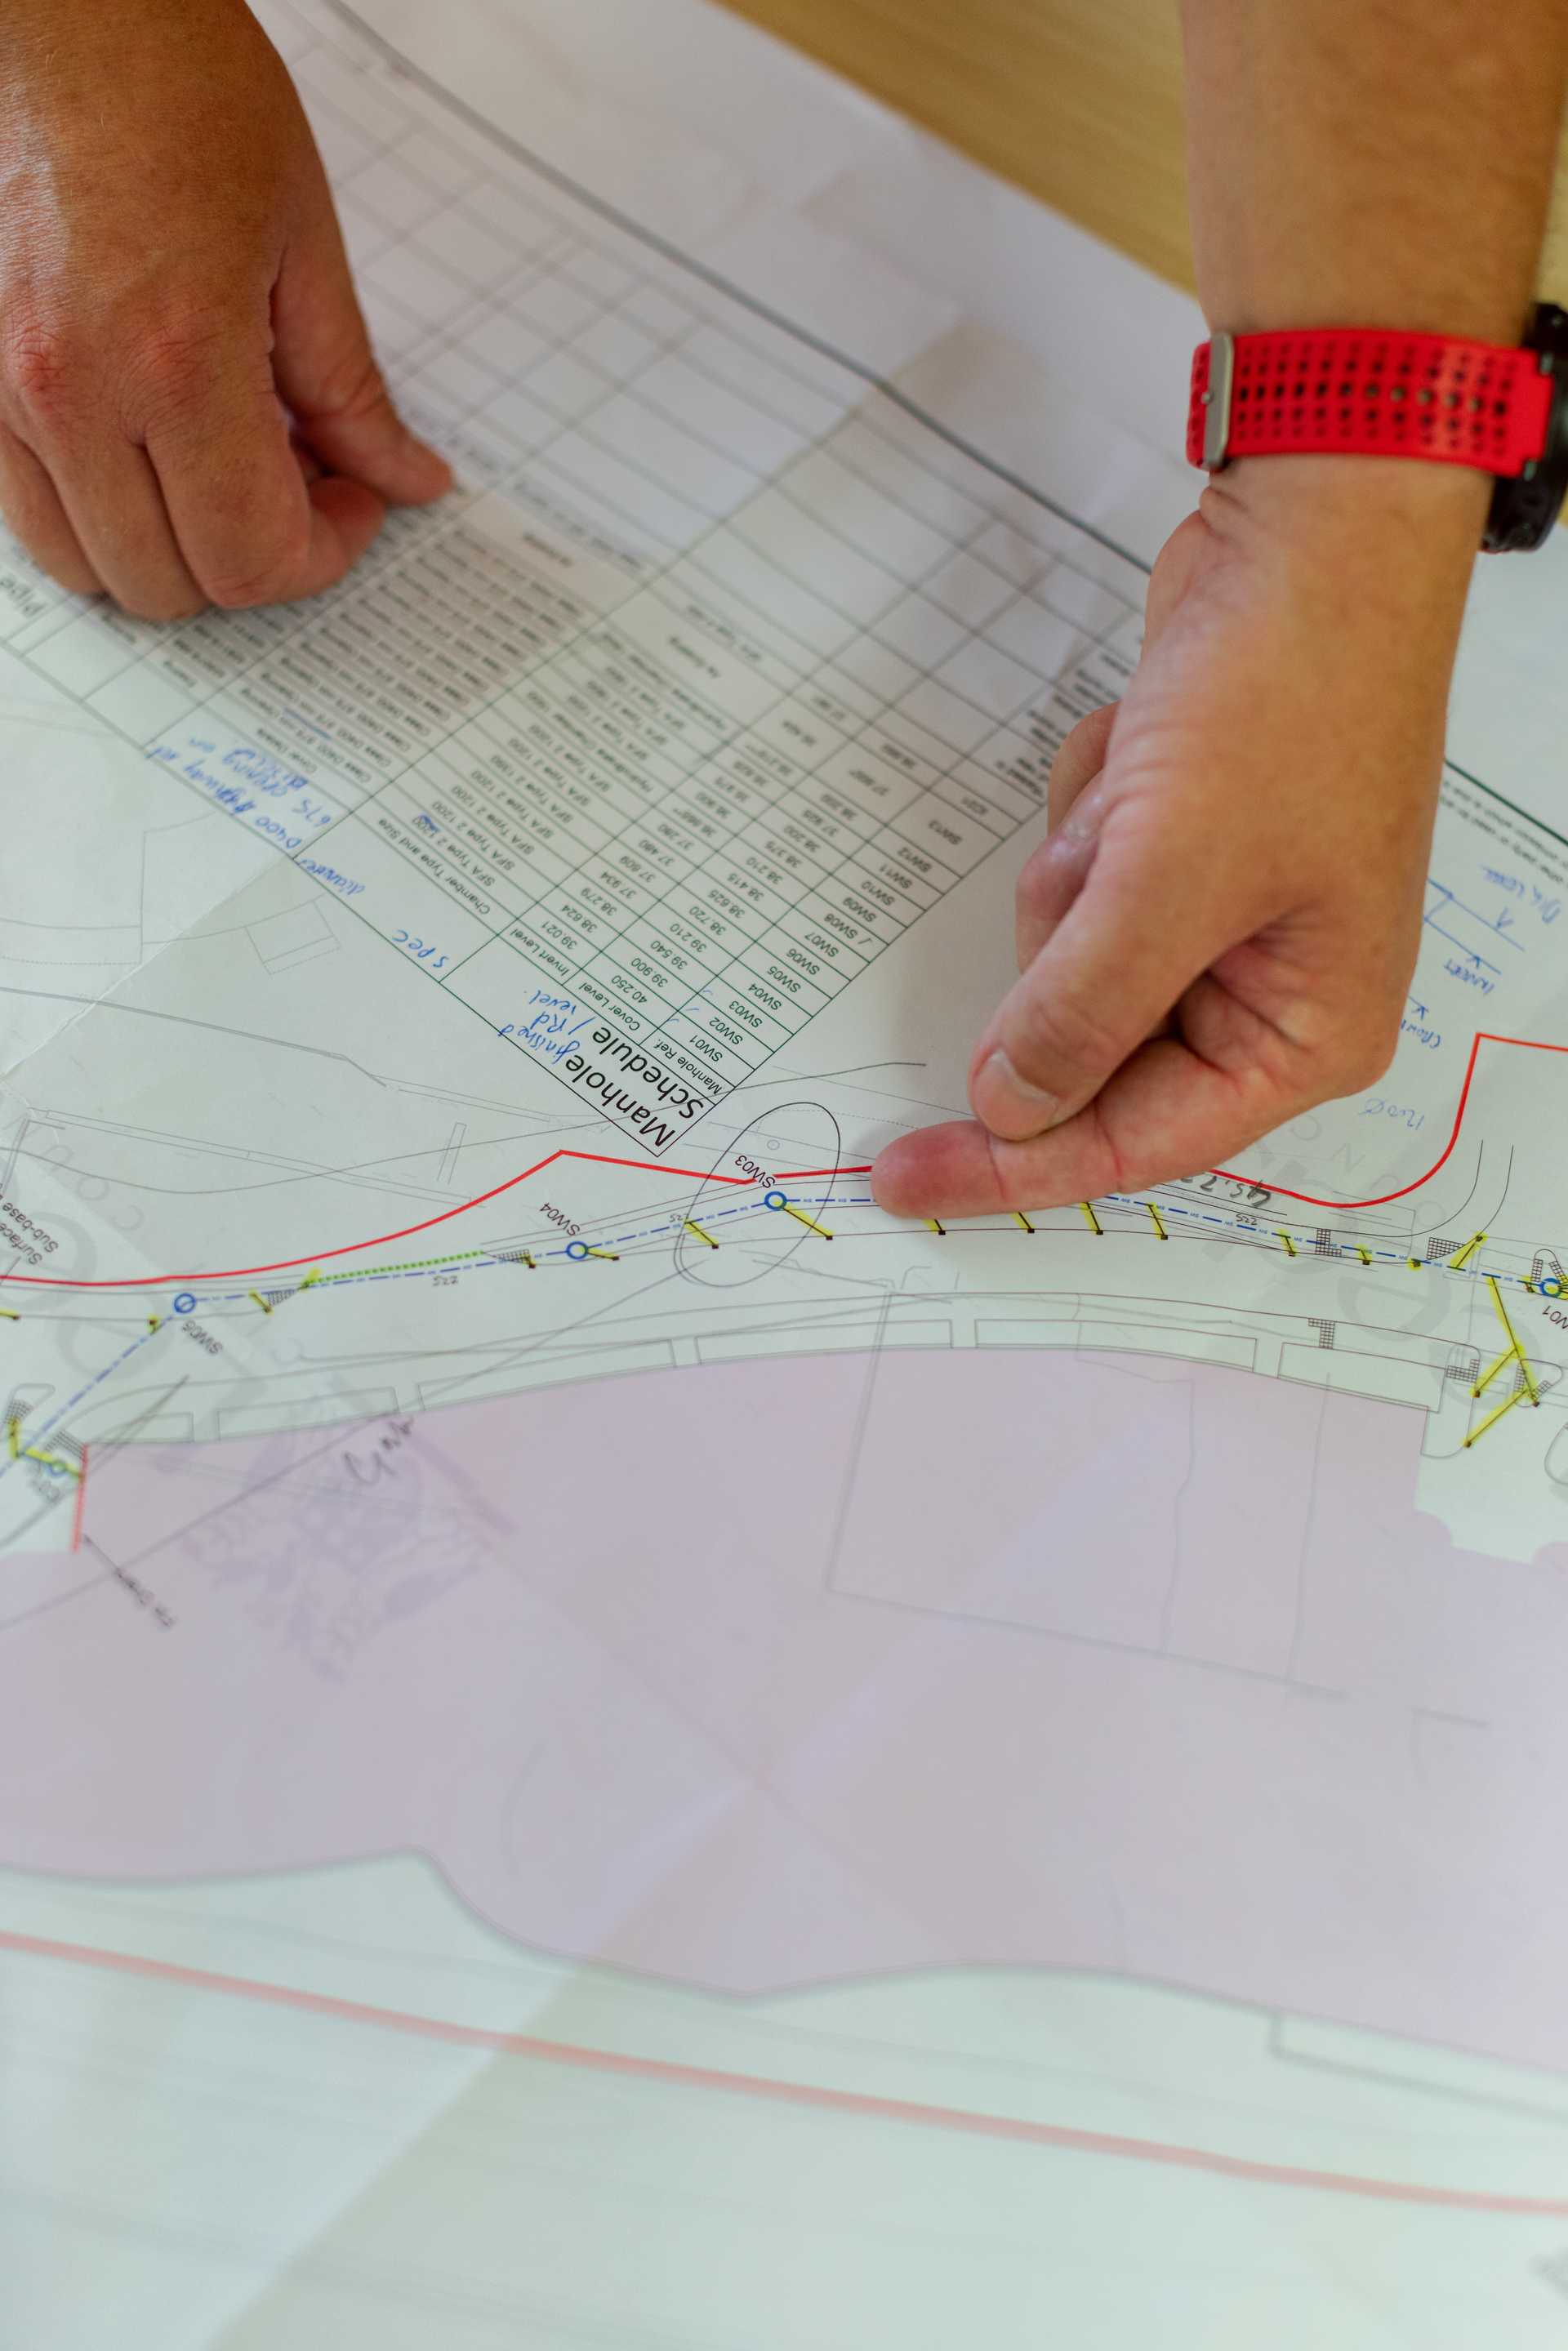 A pair of hands points out a feature on a map.